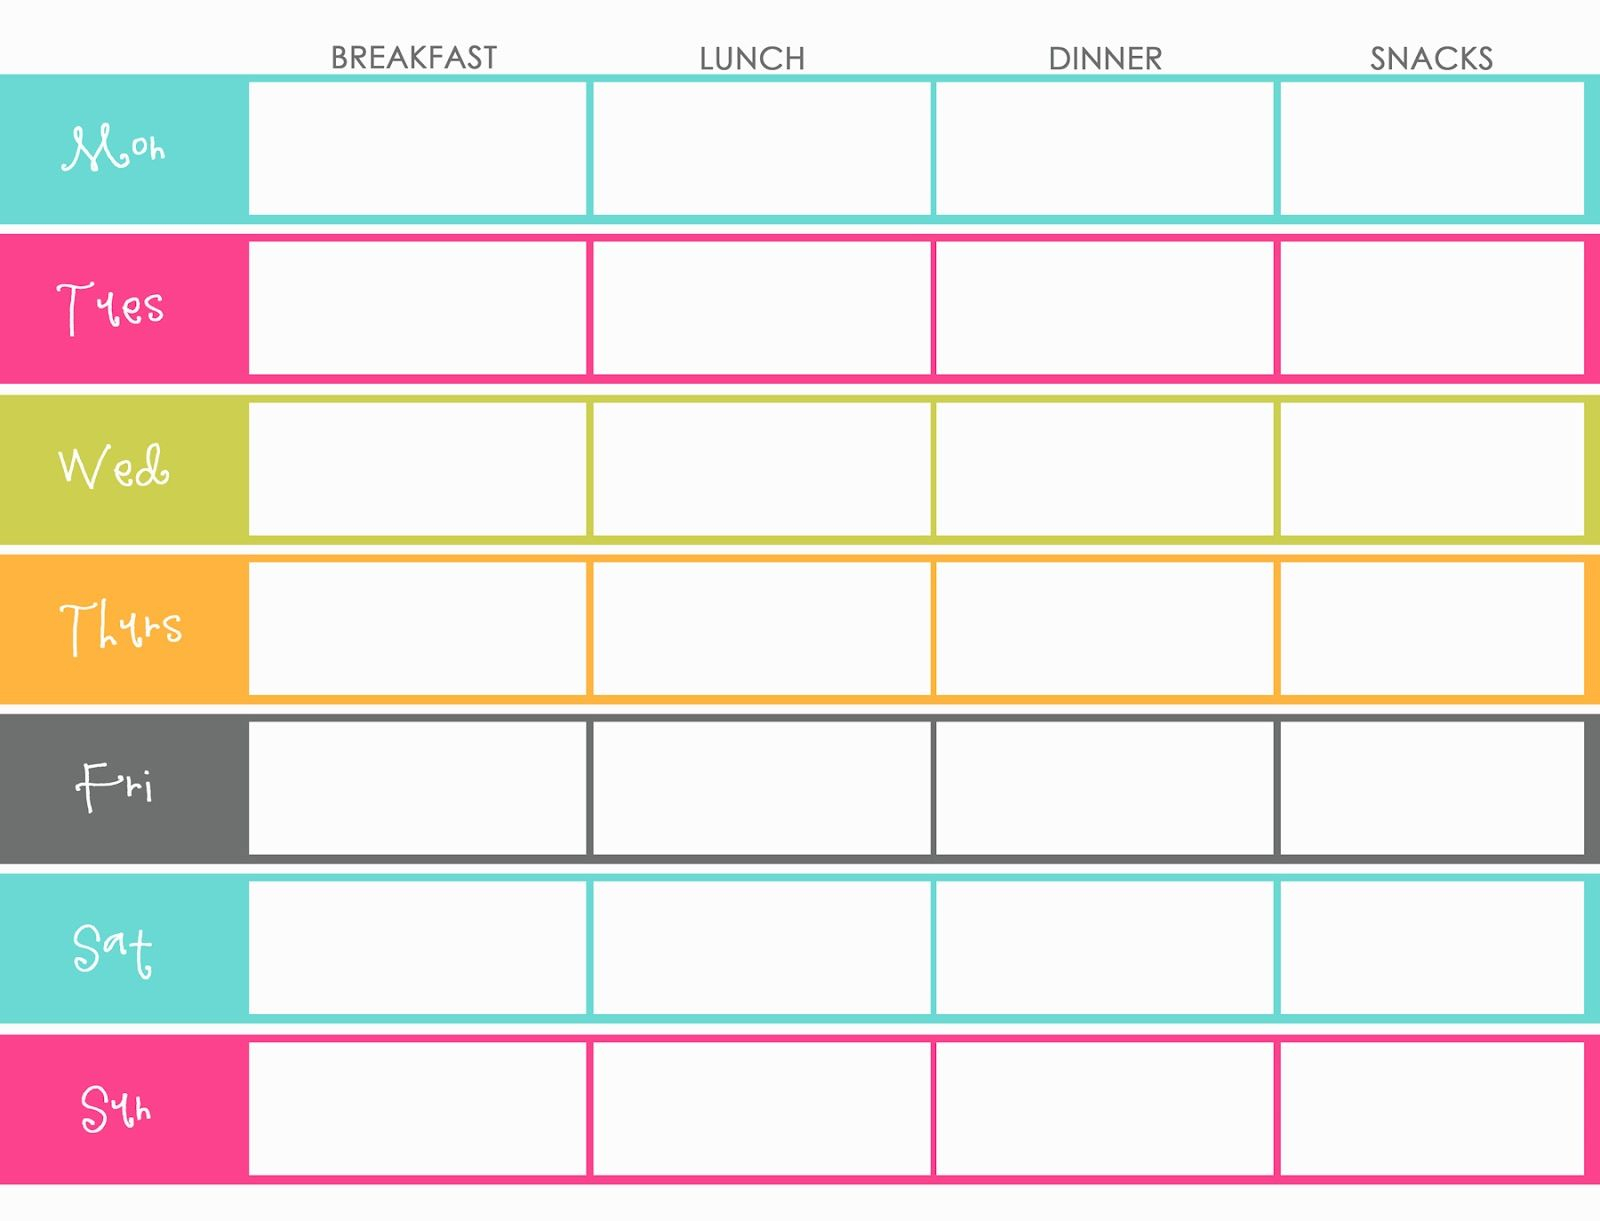 027 Free Menu Planner Template Awesome Ideas Diet Plan With Throughout Weekly Meal Planner Template Word